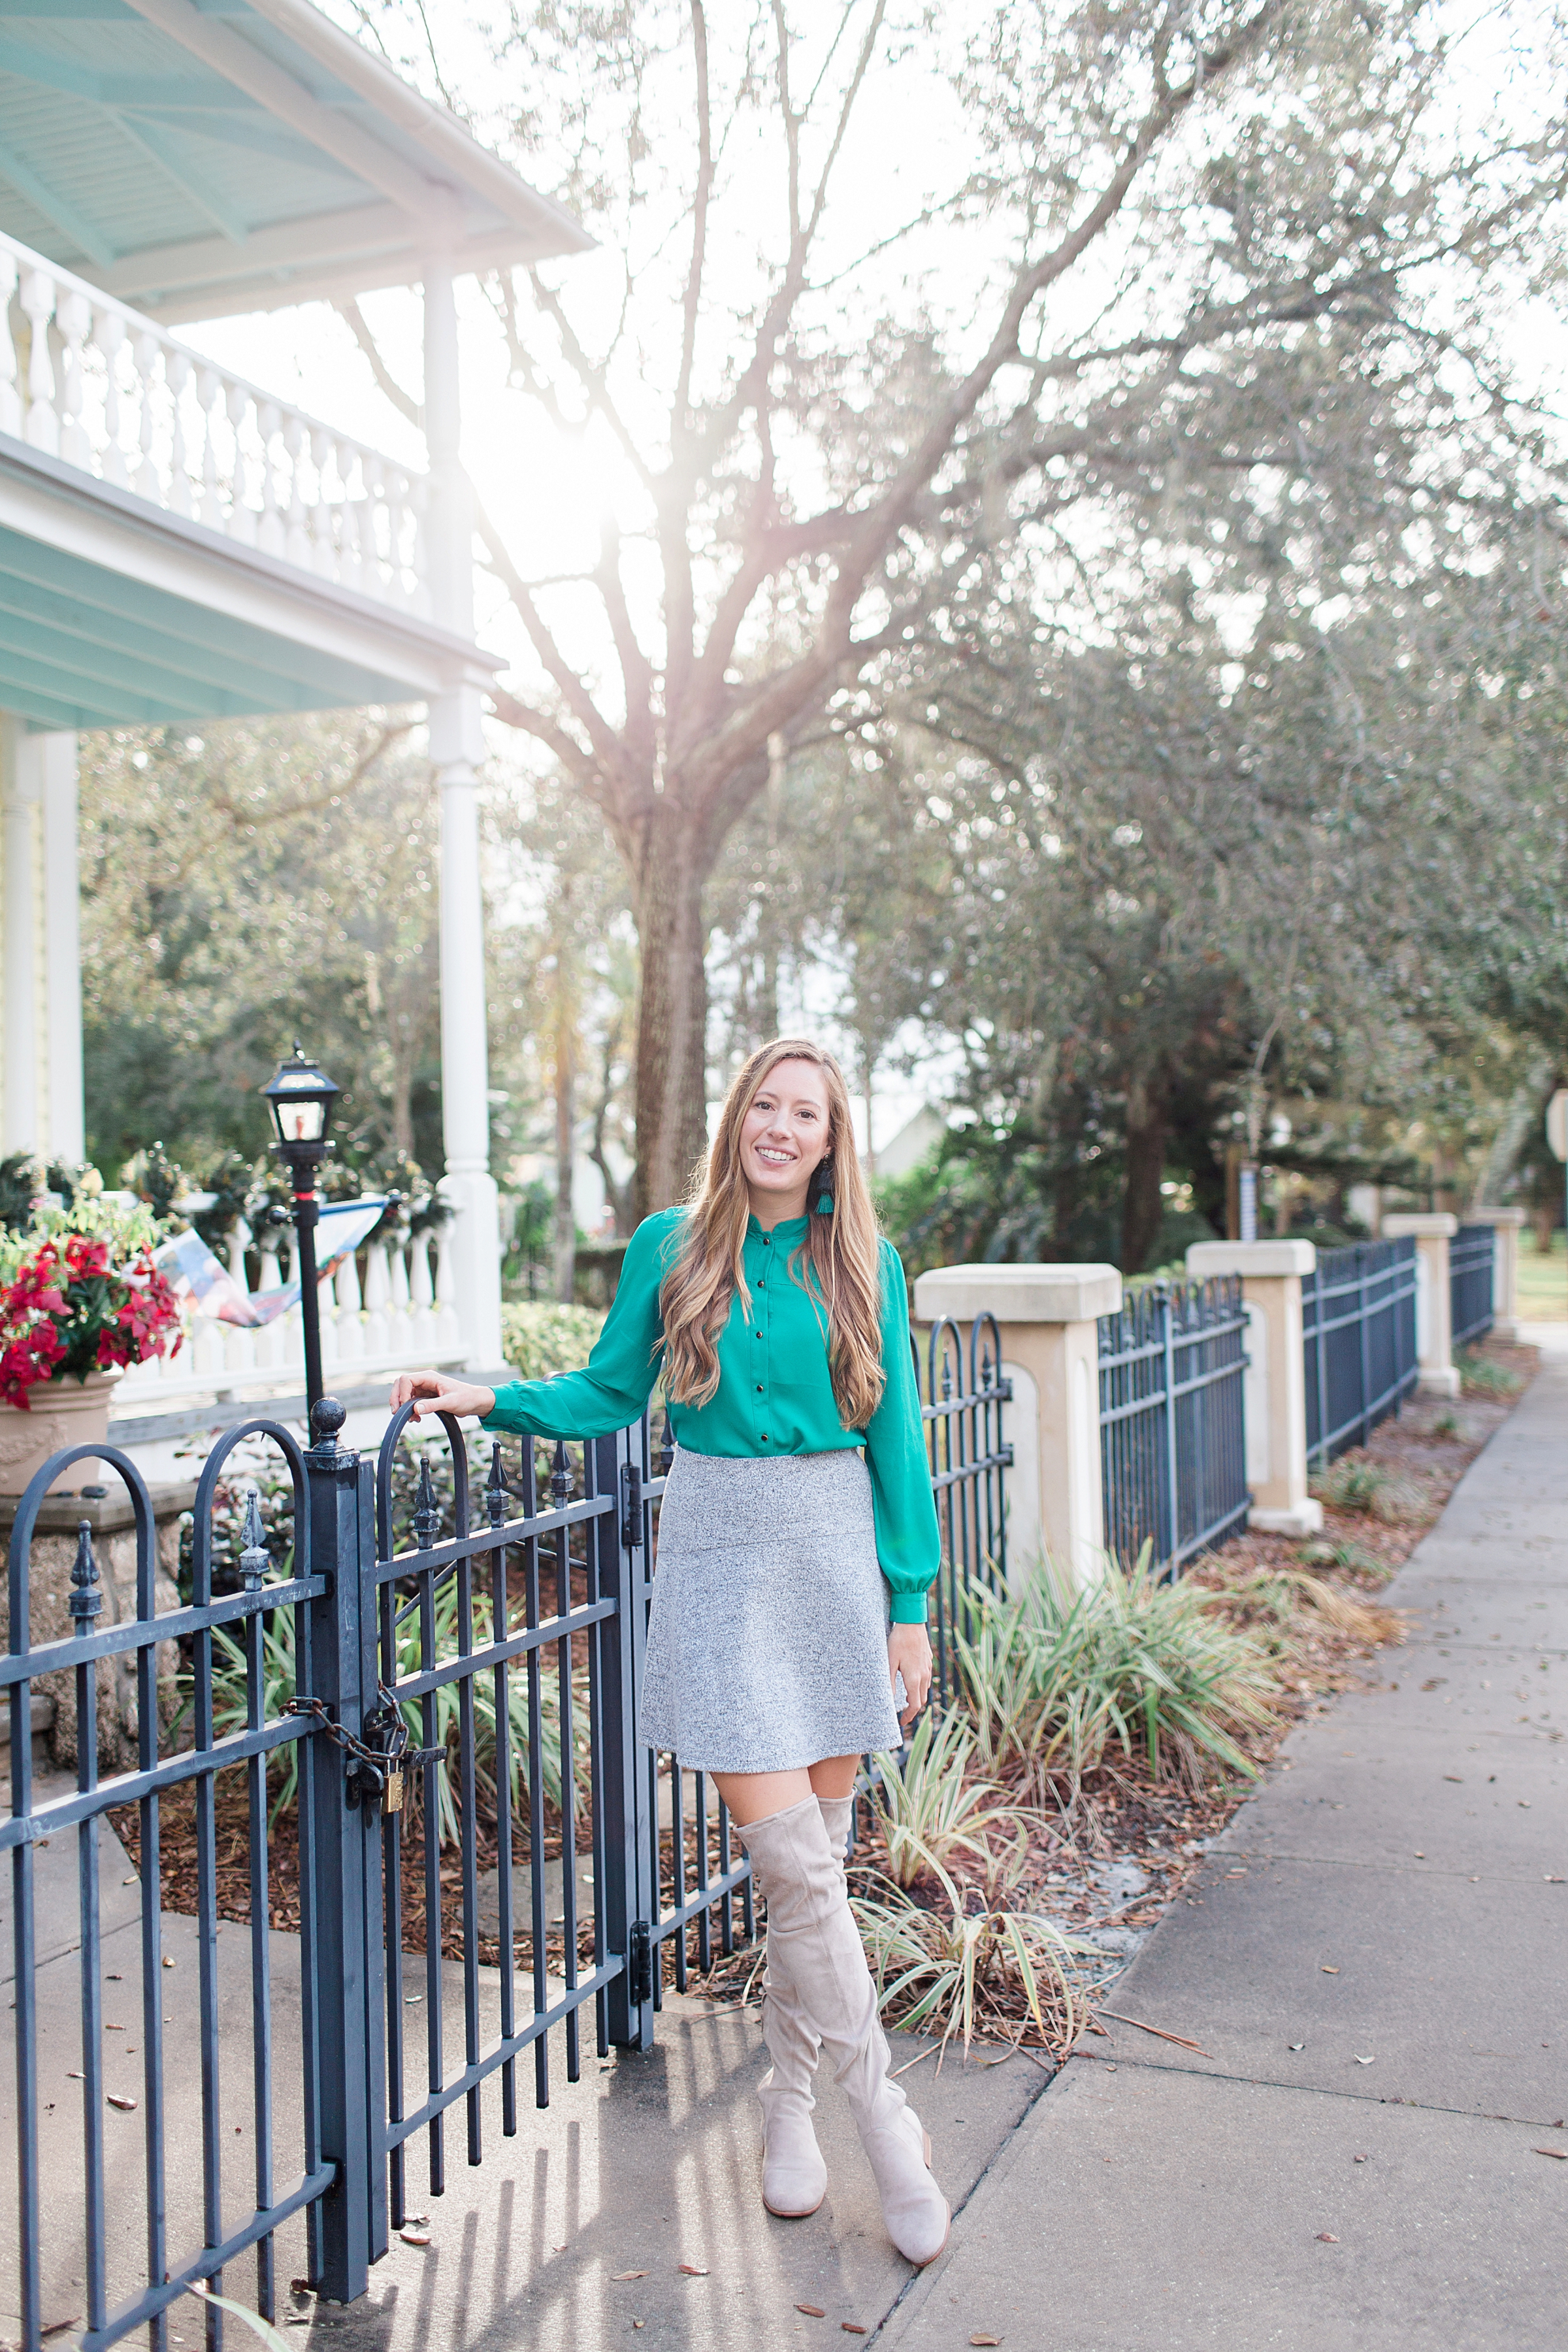 Festive Christmas Party Outfit // What to Wear for a Christmas Party // Christmas Day Outfit // Green Blouse // Grey Over the Knee Boots // LOFT Swing Skirt - More on www.sunshinestyleblog.com